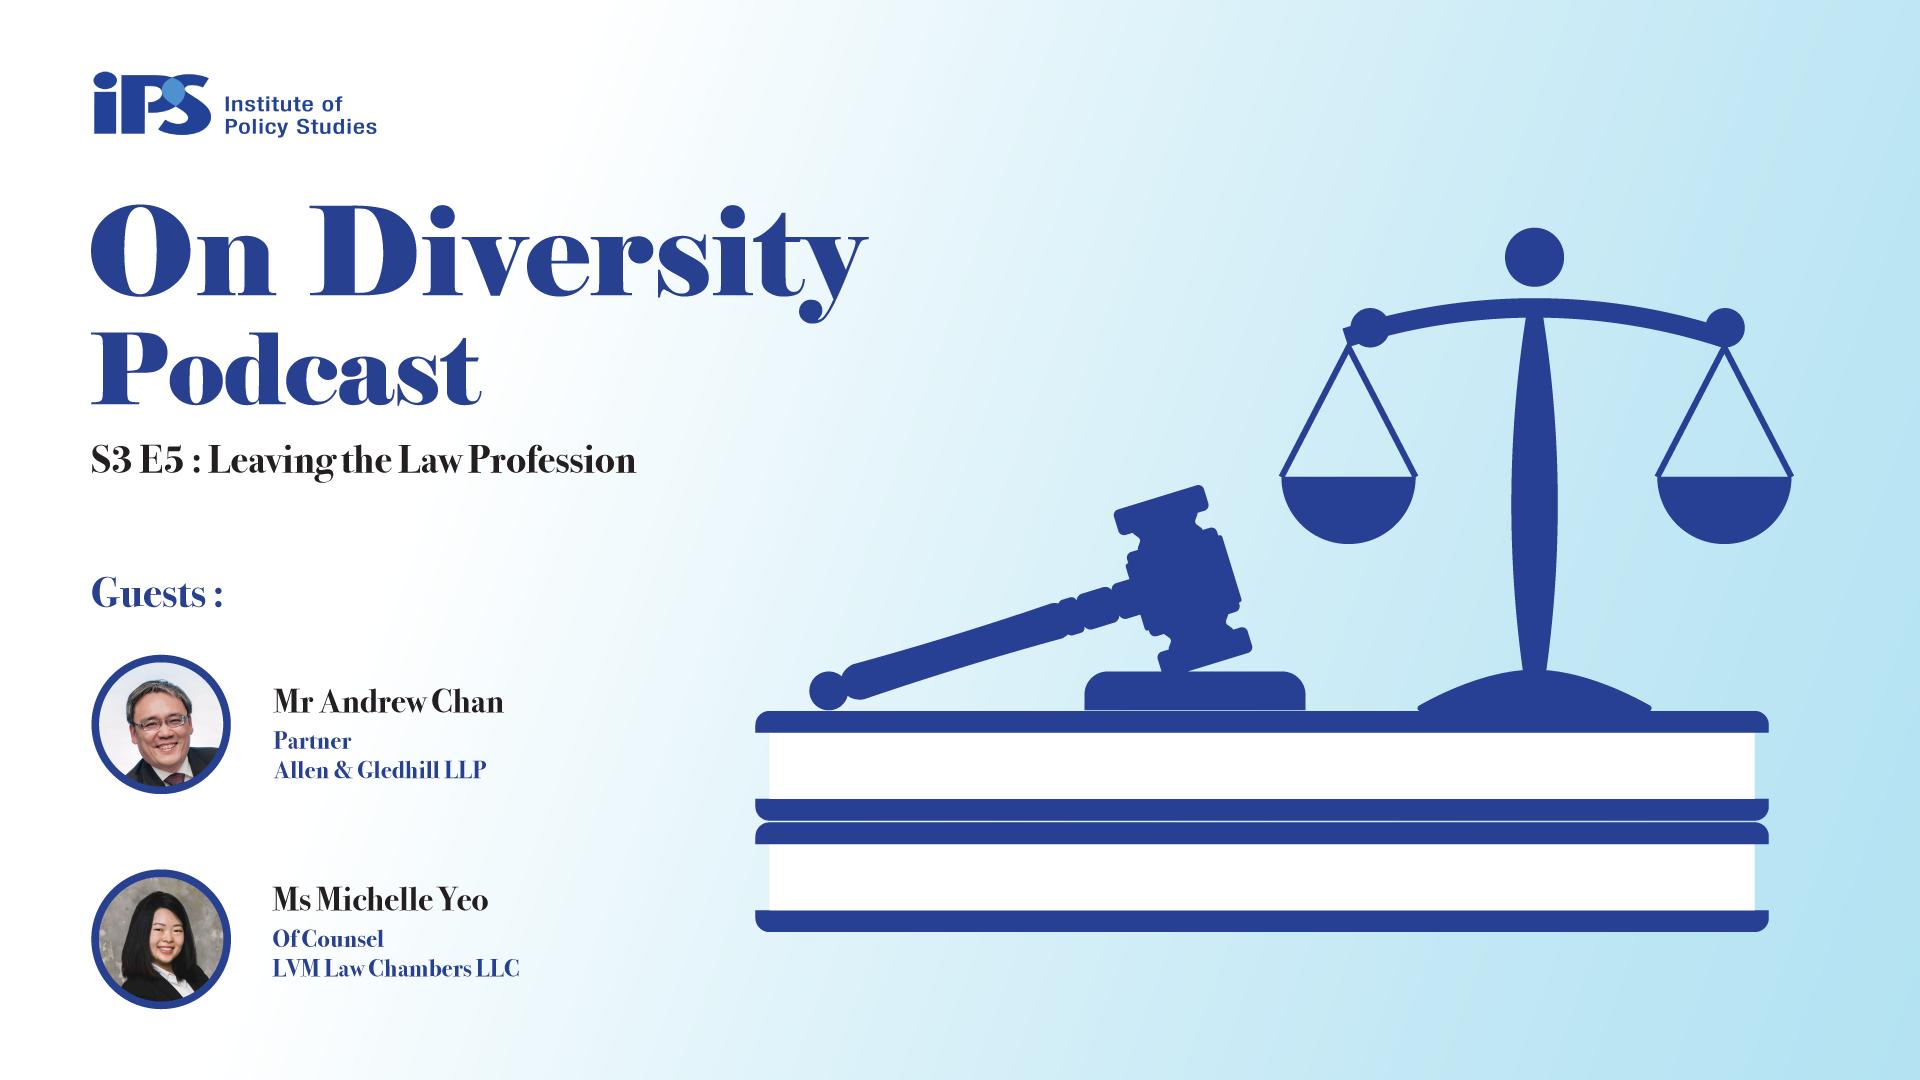 IPS On Diversity Podcast S3E5: Leaving the Law Profession